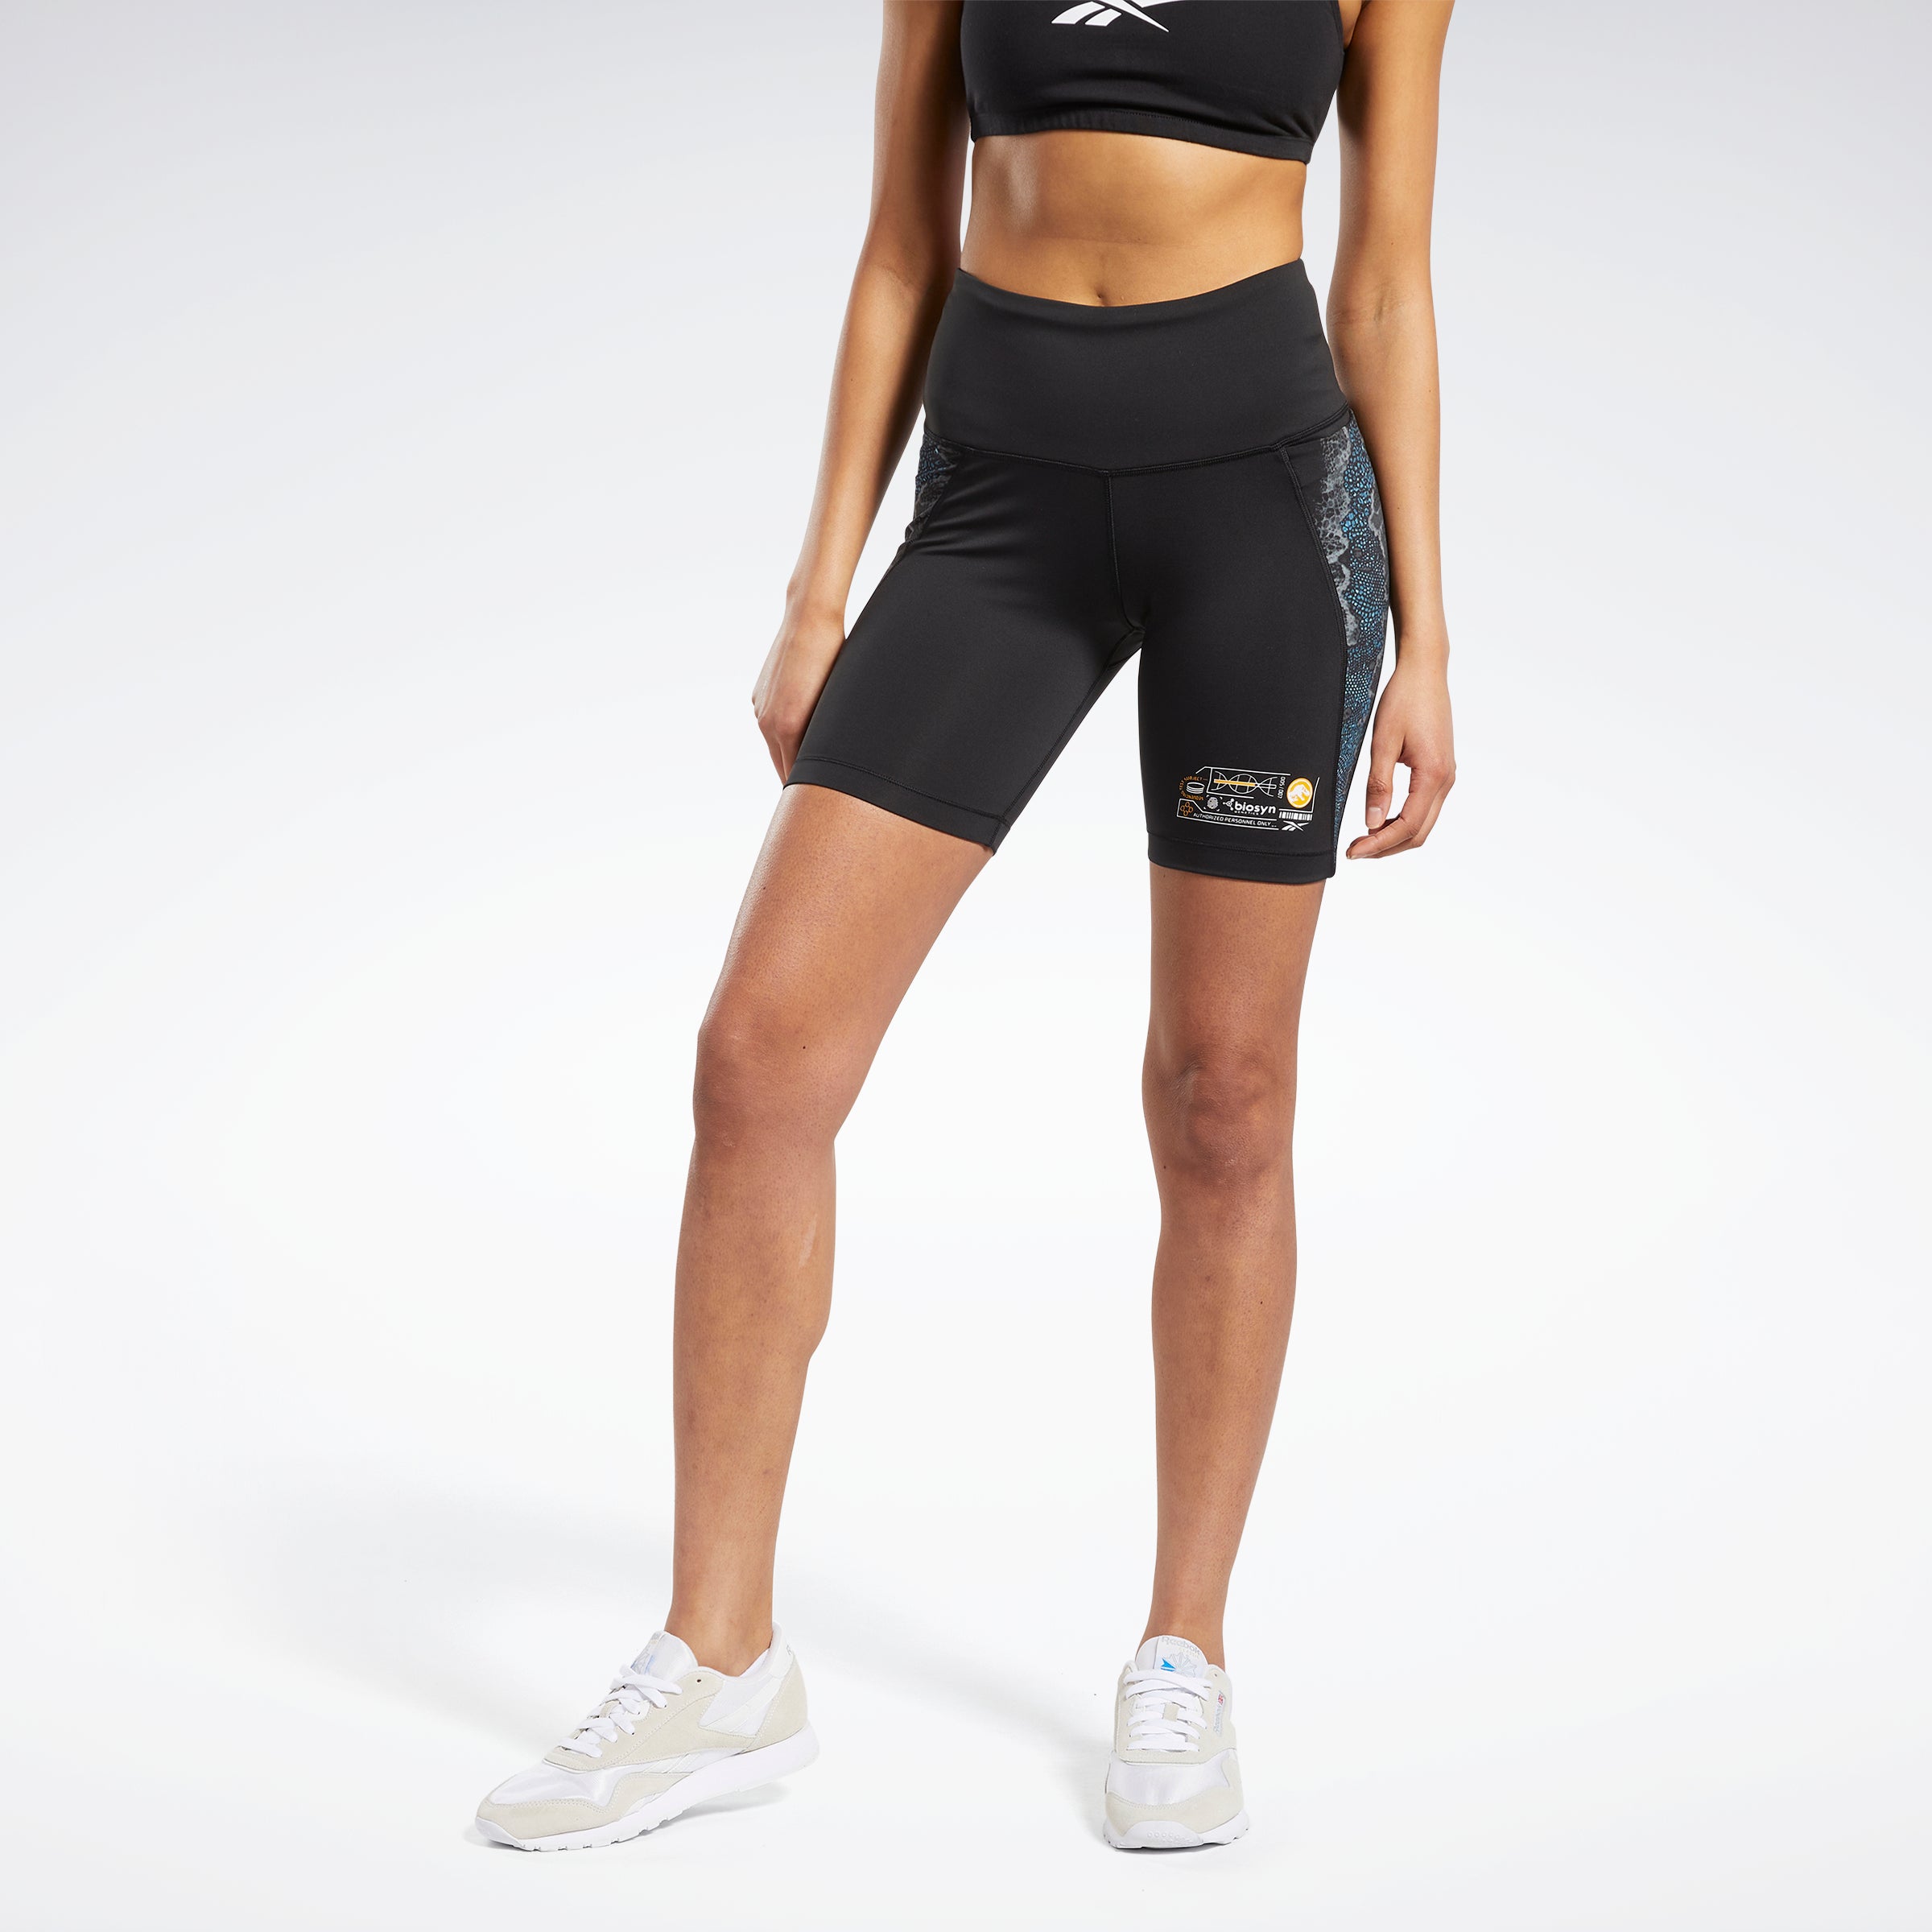 Reebok United By Fitness Women's Chase Bootie Shorts - Black